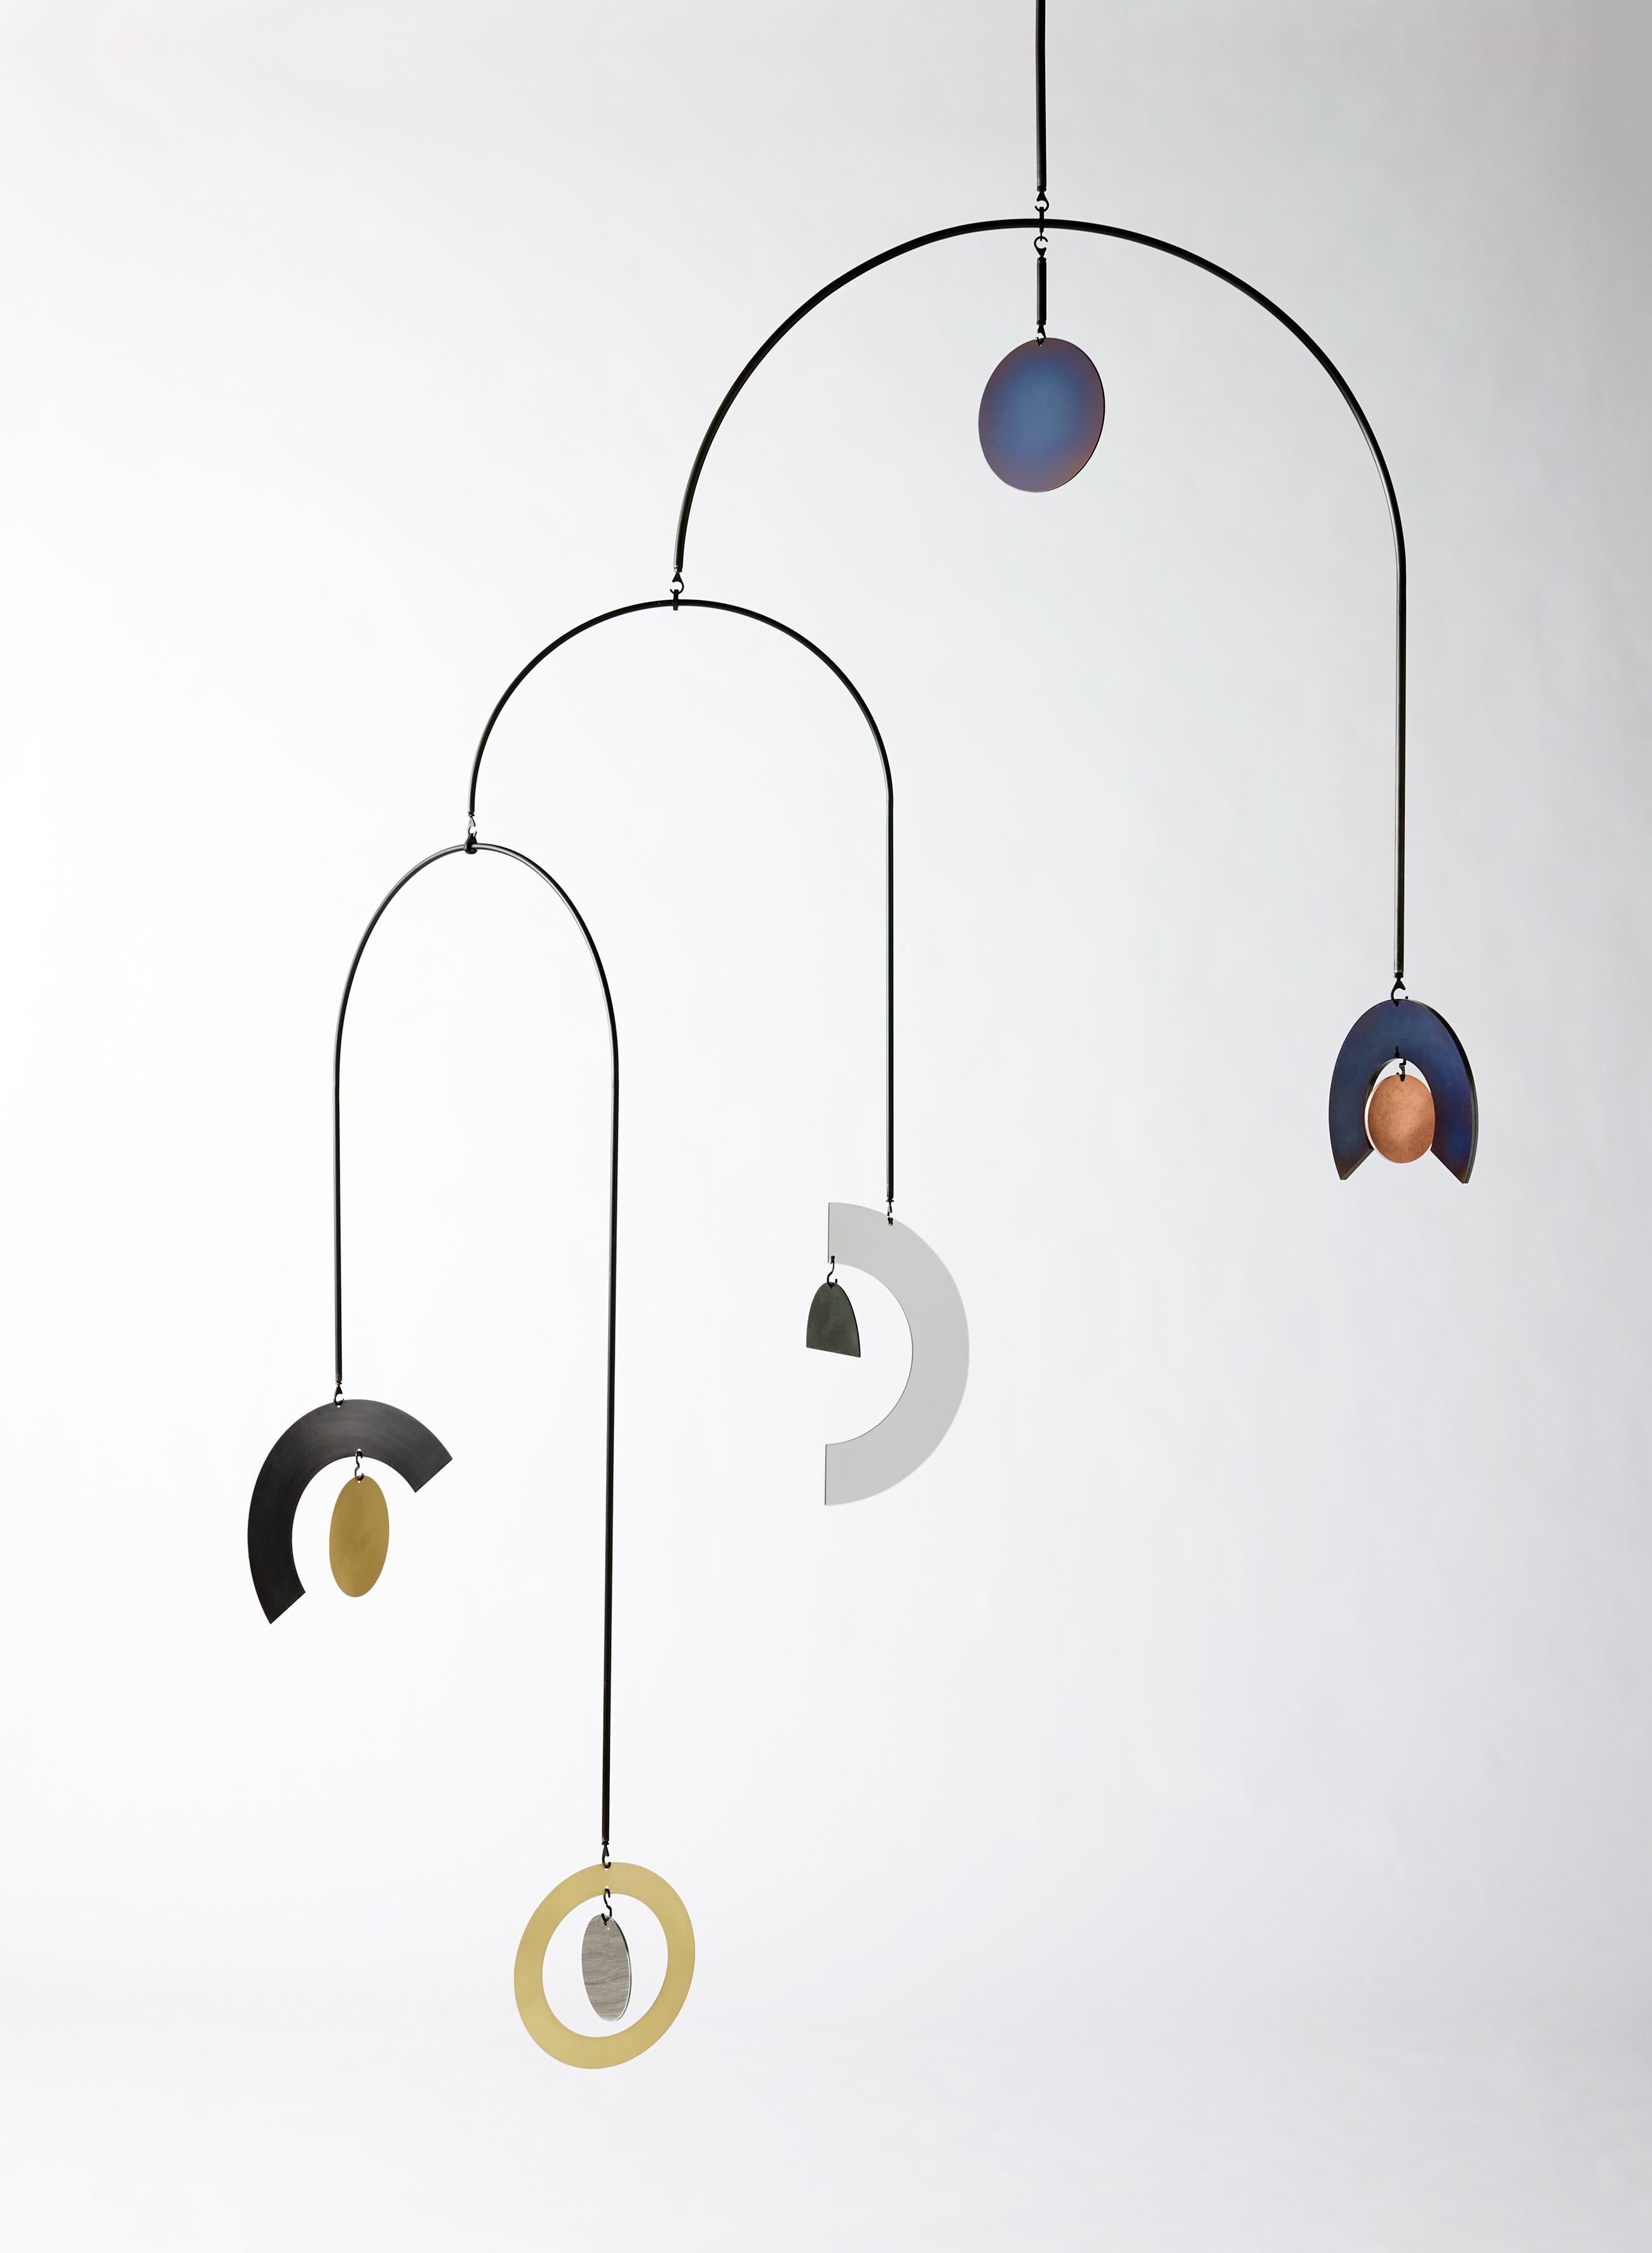 An undulating composition of discs, rings, half moons and rainbows cascade from large sweeping arcs to create a hypnotic hanging sculpture. Each object has a unique patina that draws inspiration from our solar system. Surface textures that recall